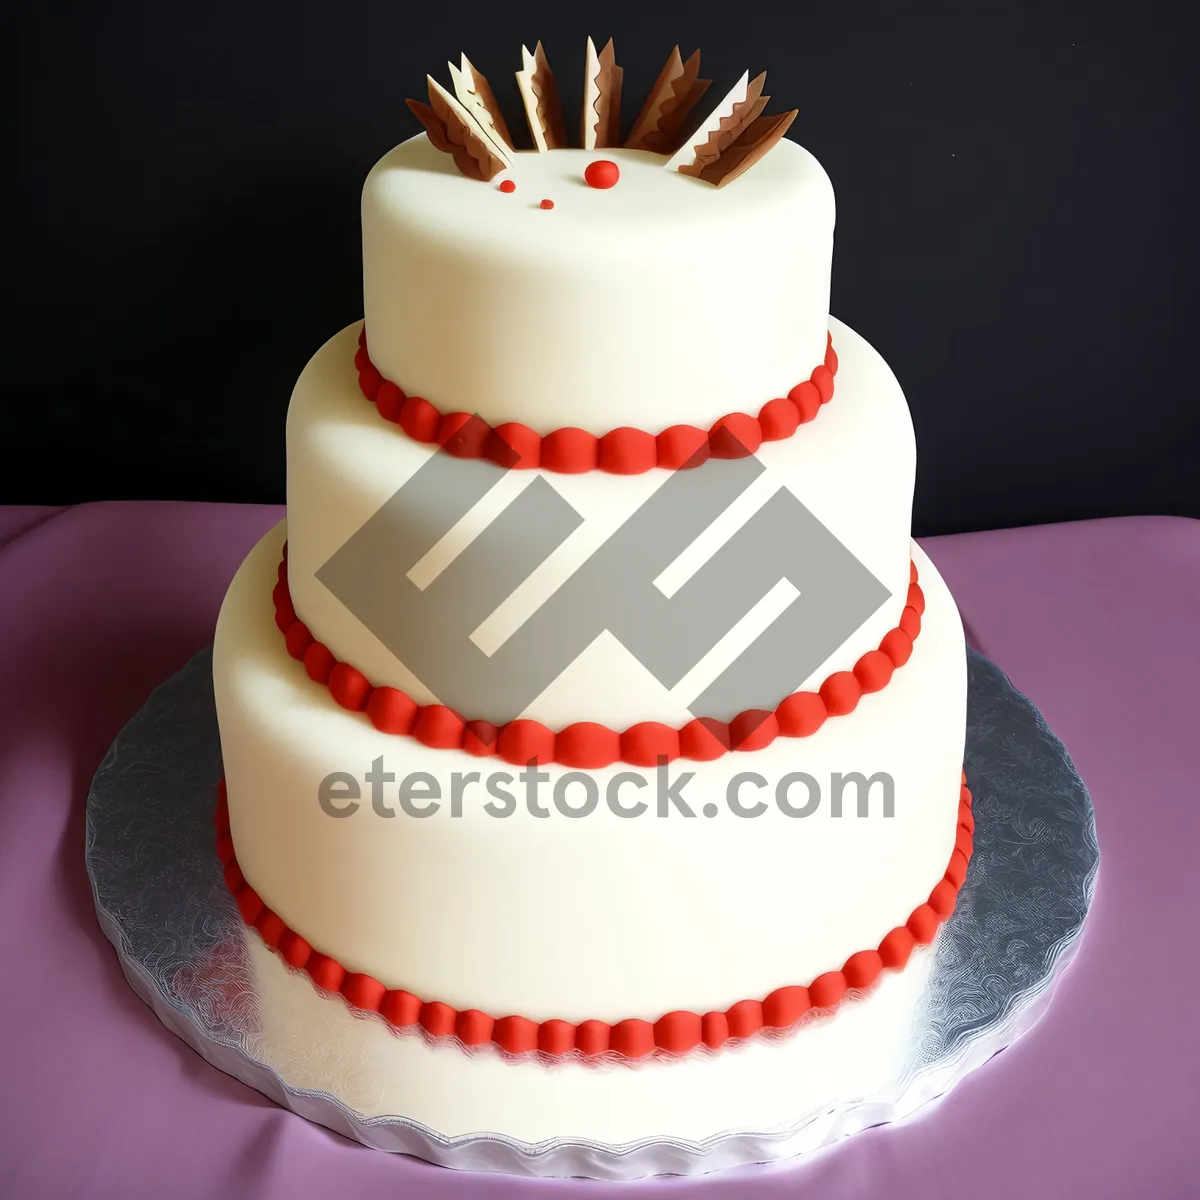 Picture of Delicious Celebration Cake with Pink Icing and Chocolate